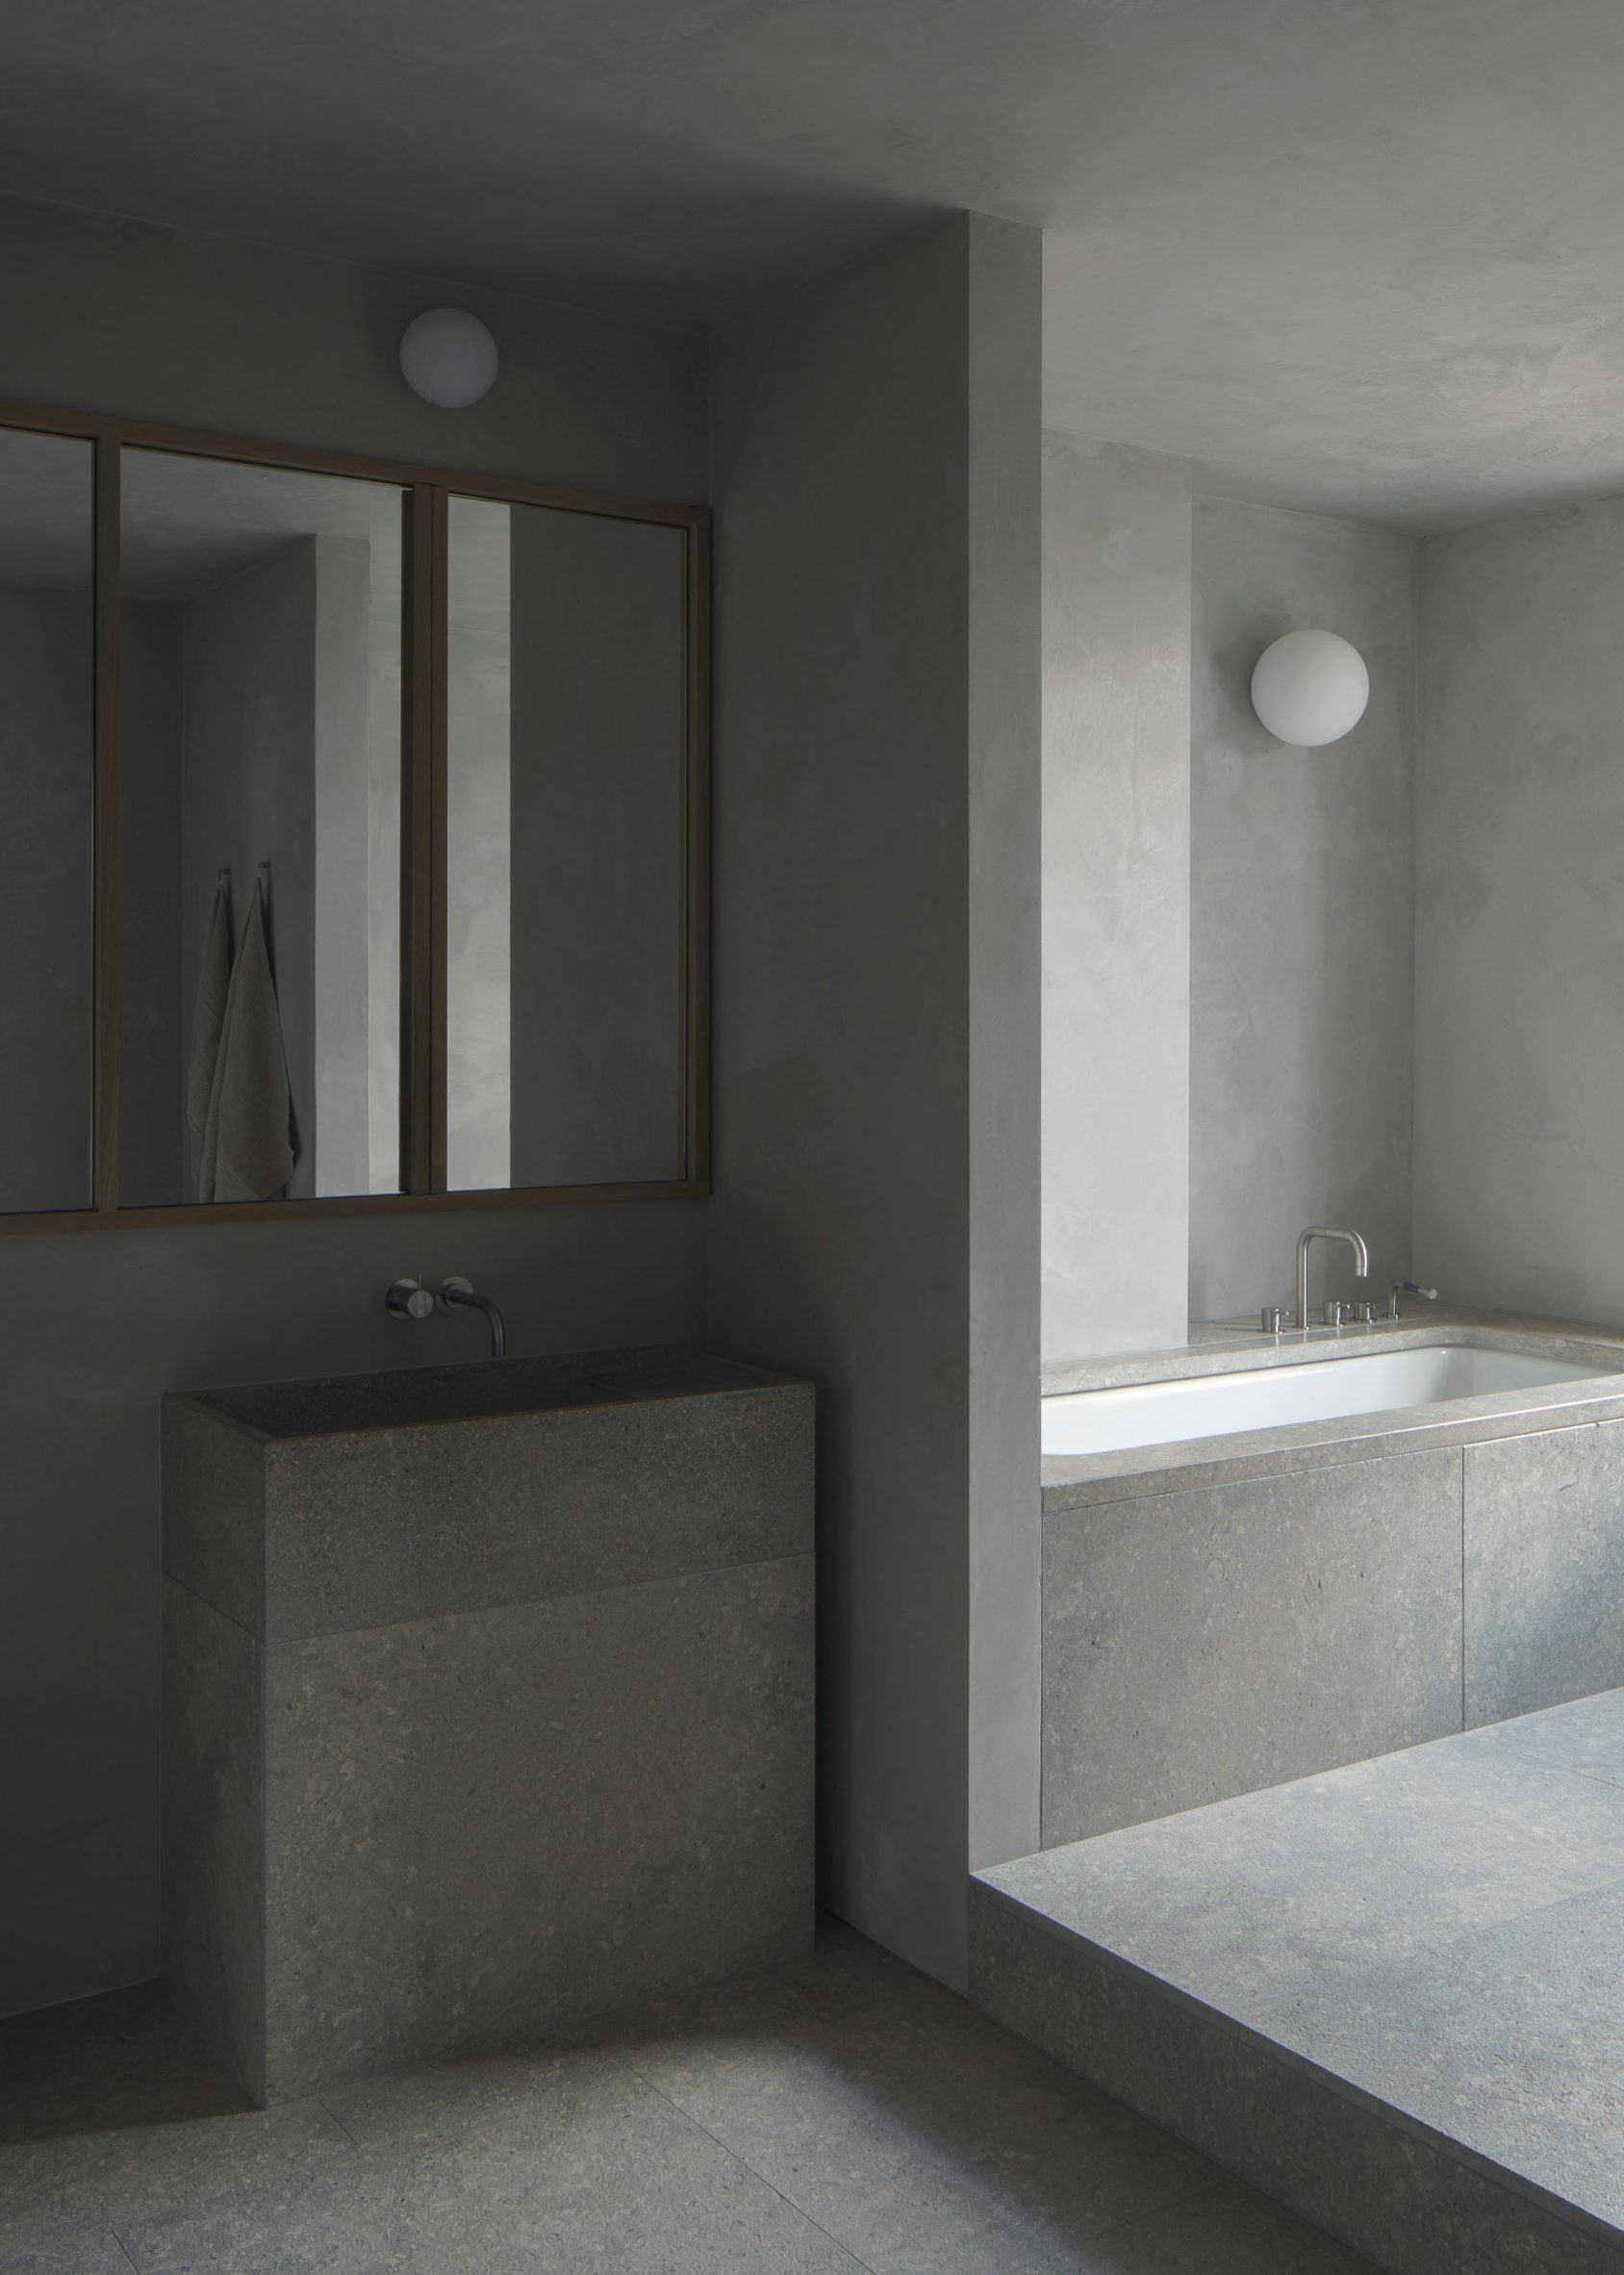 Dark bathroom with stone and concrete finishes